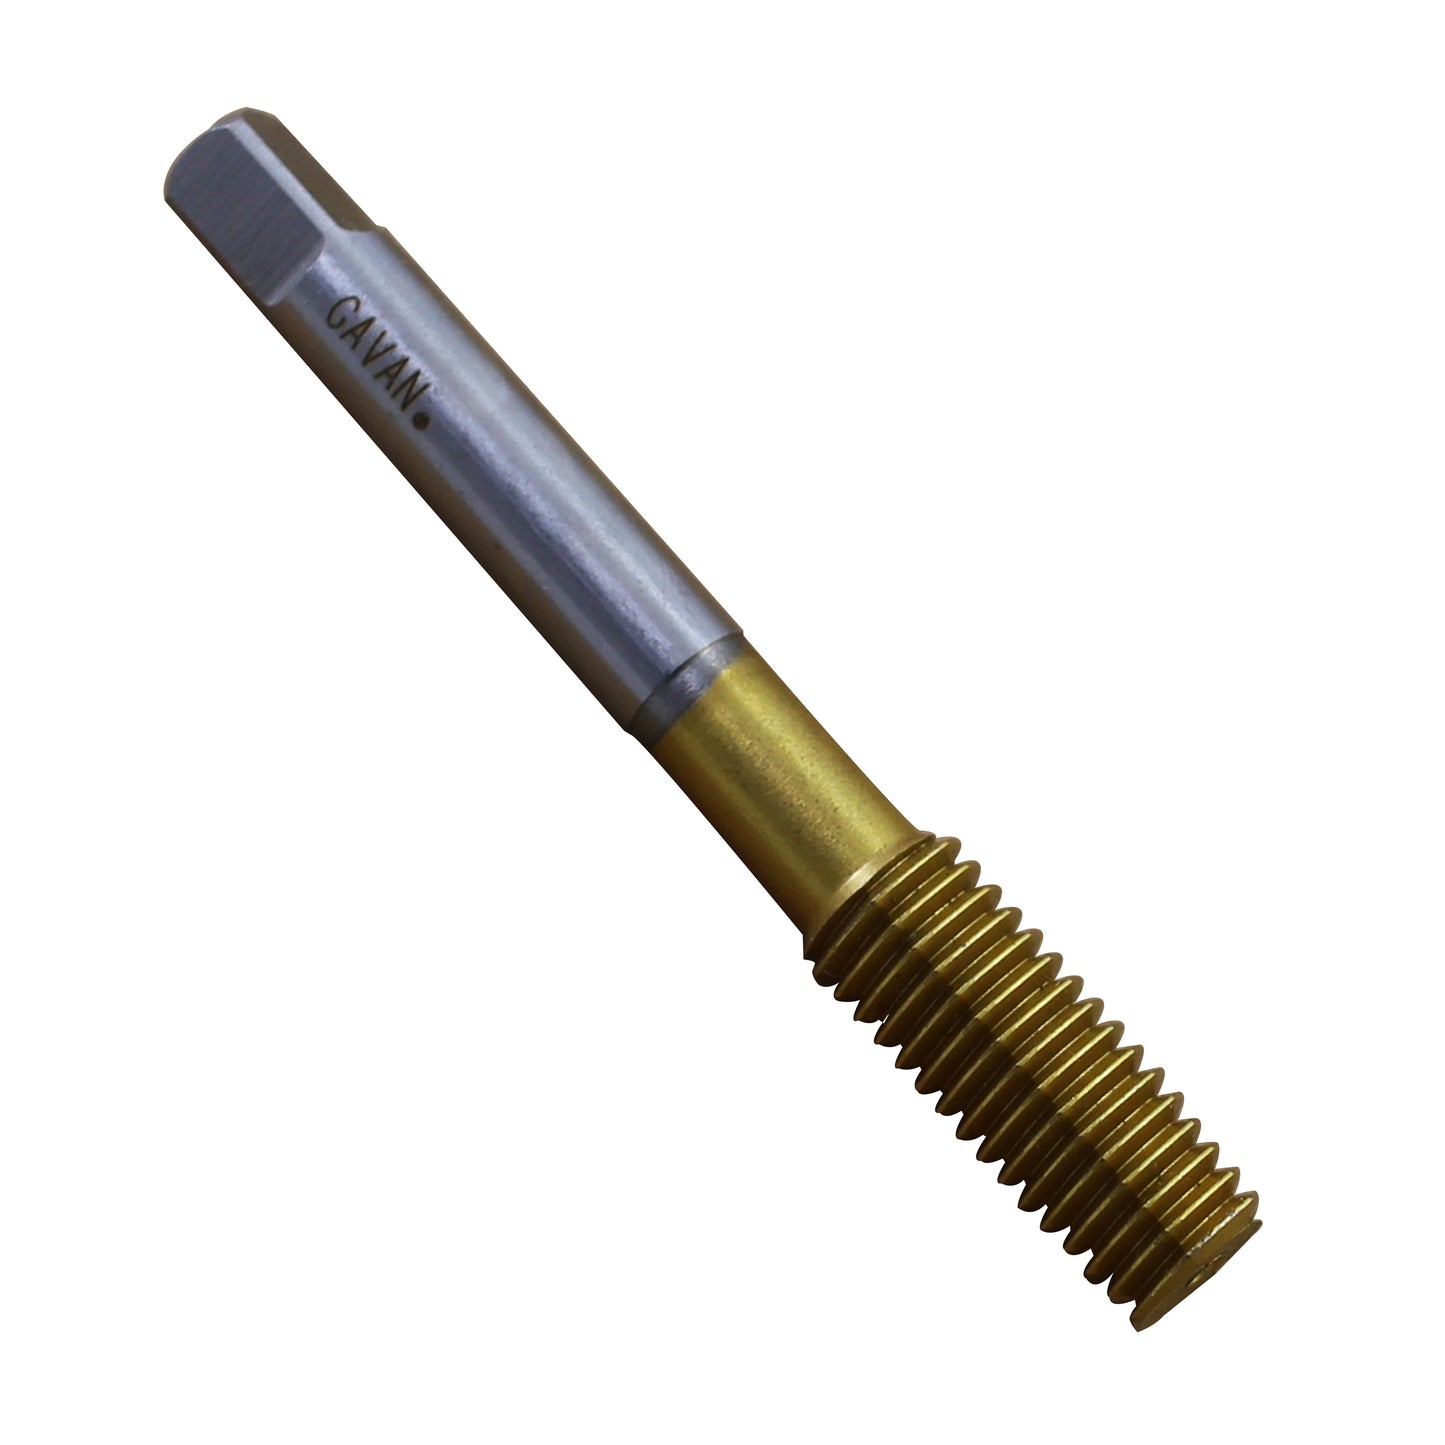 1/2" - 20 HSS Unified Right hand Thread Forming Tap